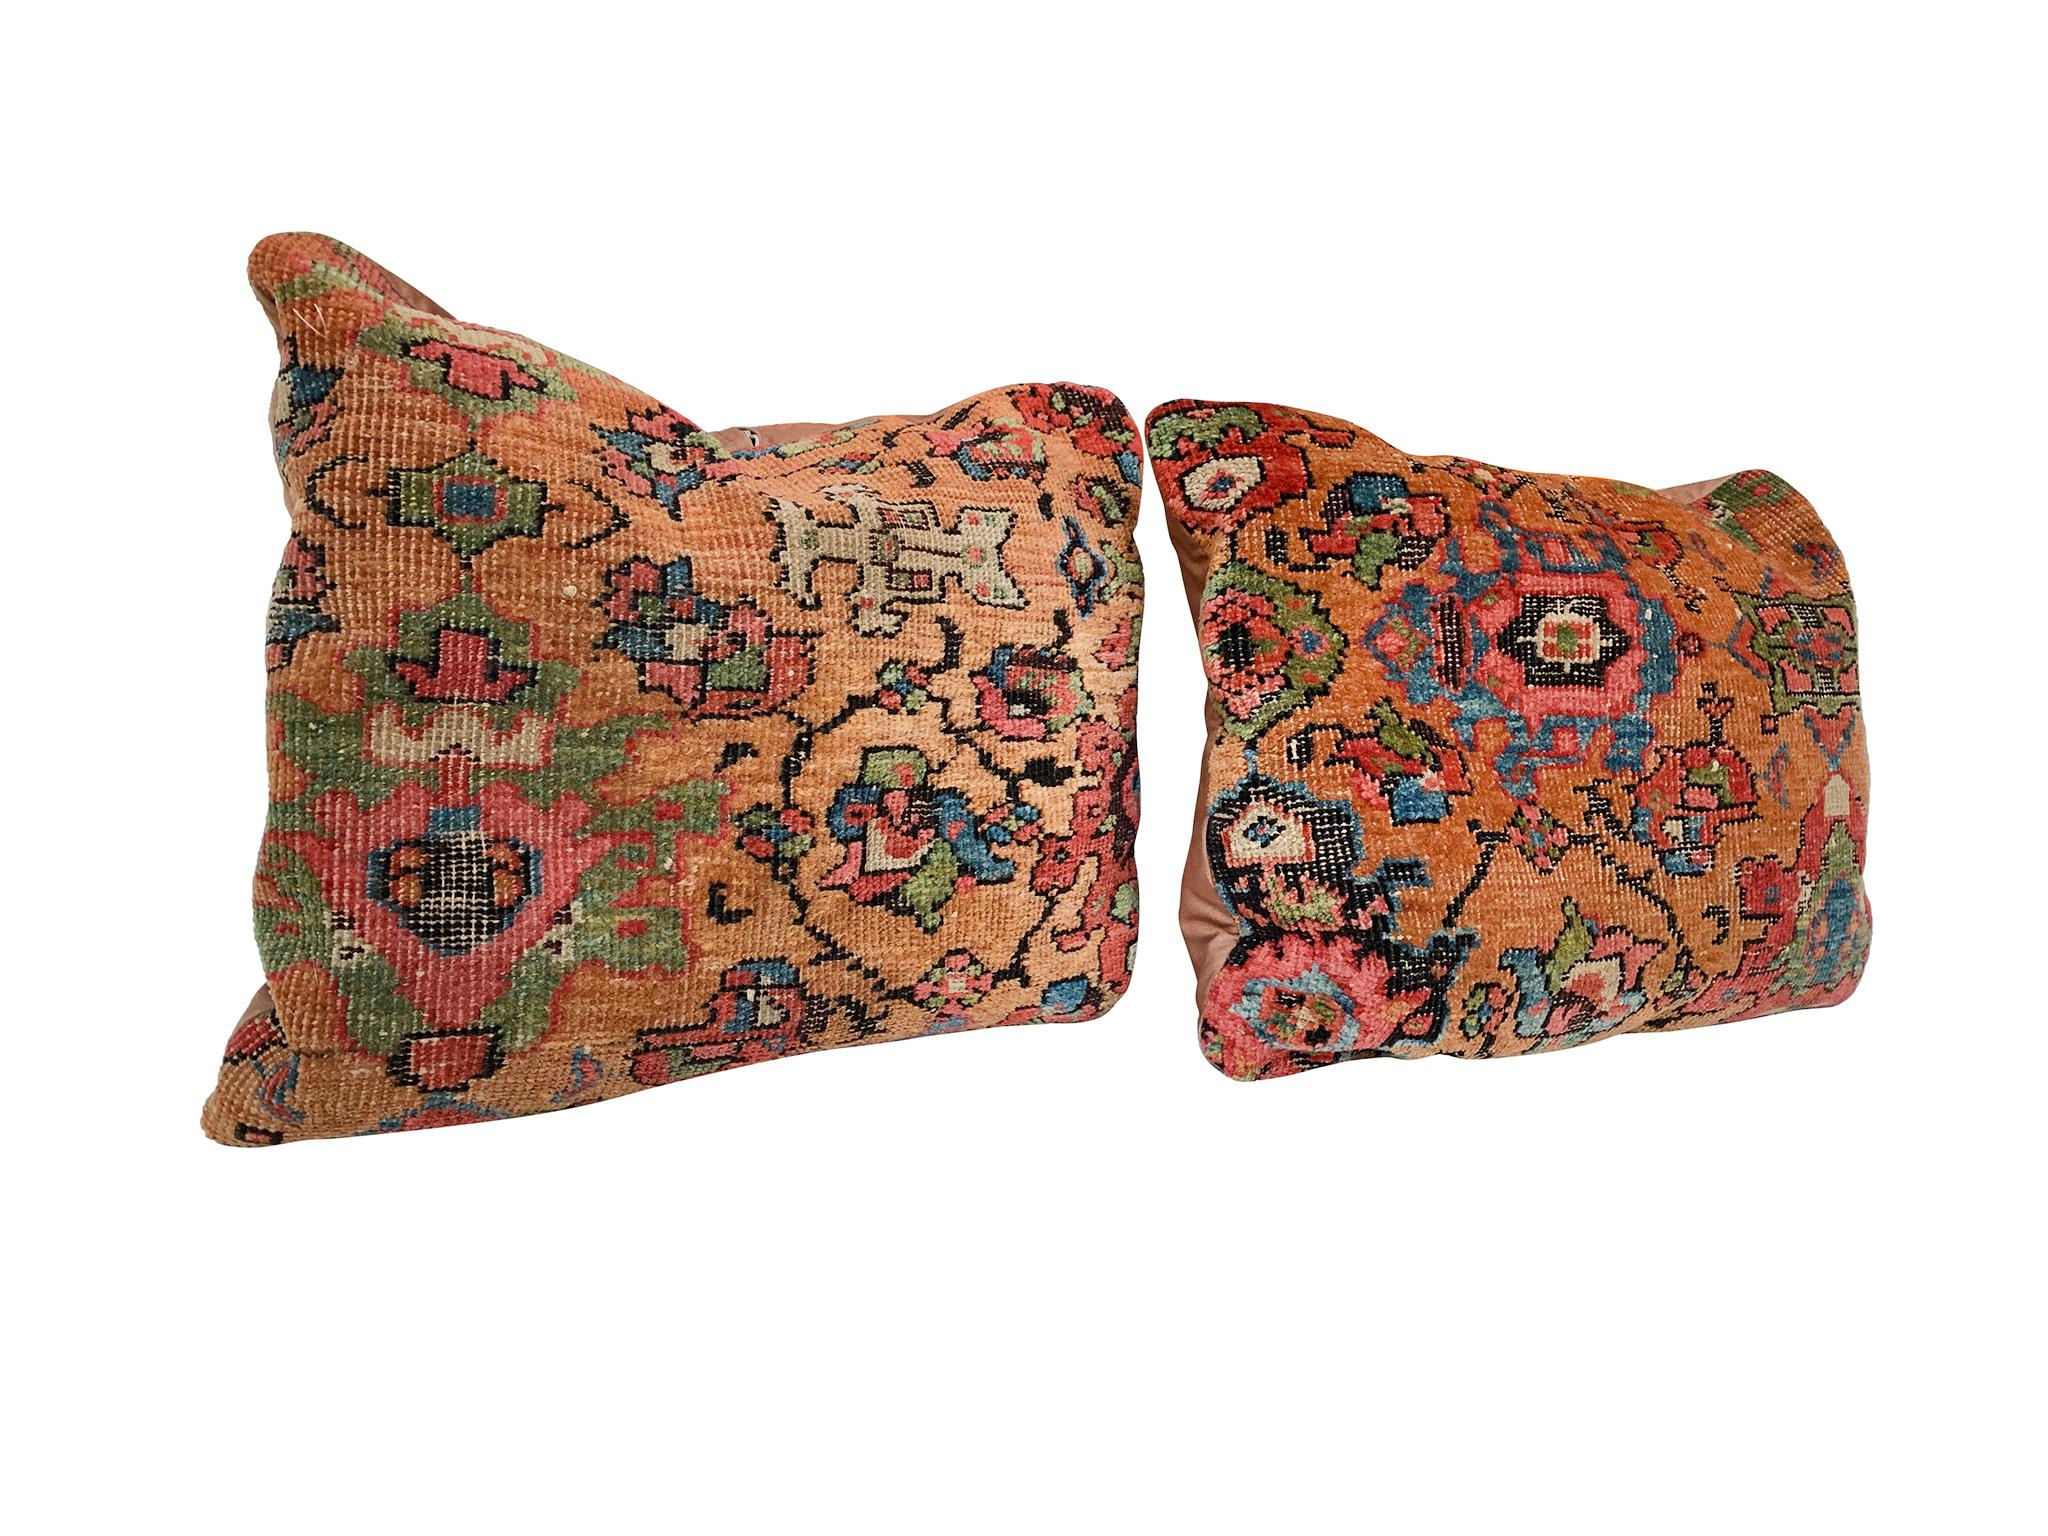 A pair of pillows consisting of fragments from a Persian rug that was itself hand-made in the Early 20th Century. The design is a rich pattern of floral and geometric motifs in a palette of copper-brown, red, blue, green, black, and yellow. The